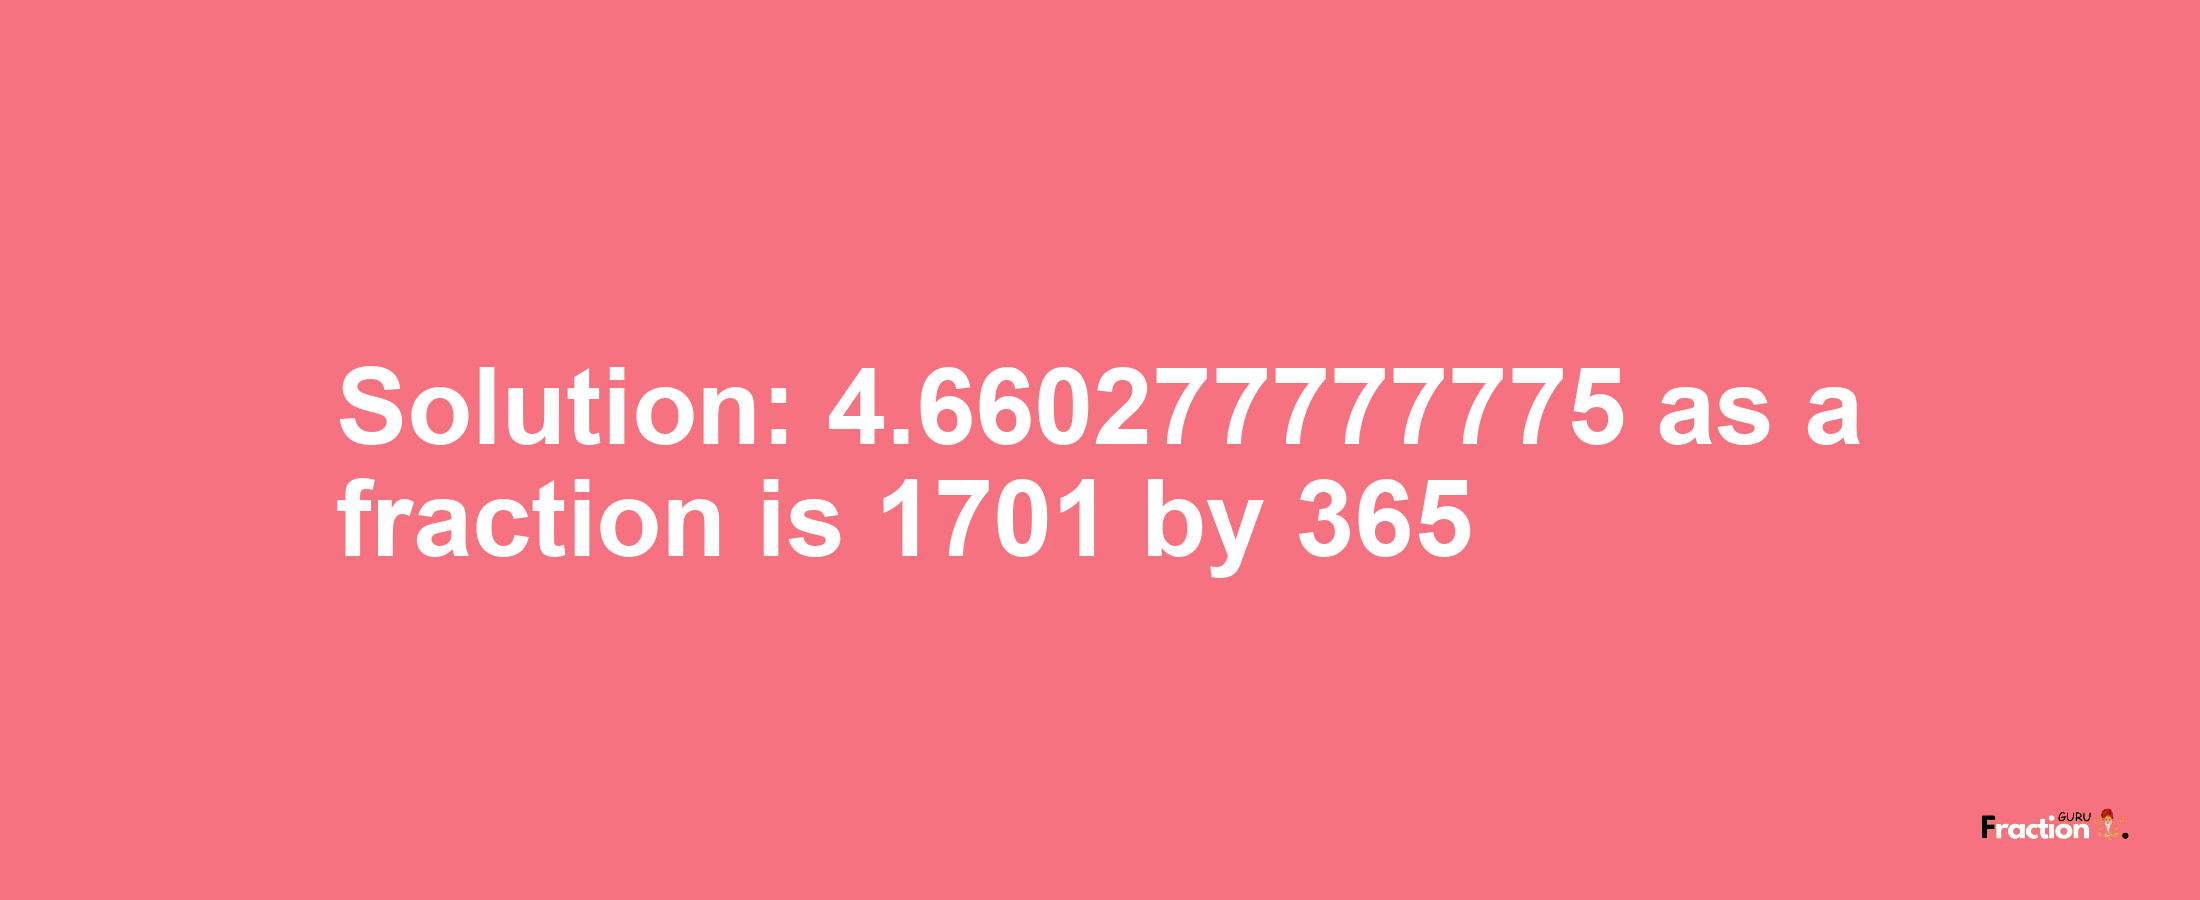 Solution:4.660277777775 as a fraction is 1701/365